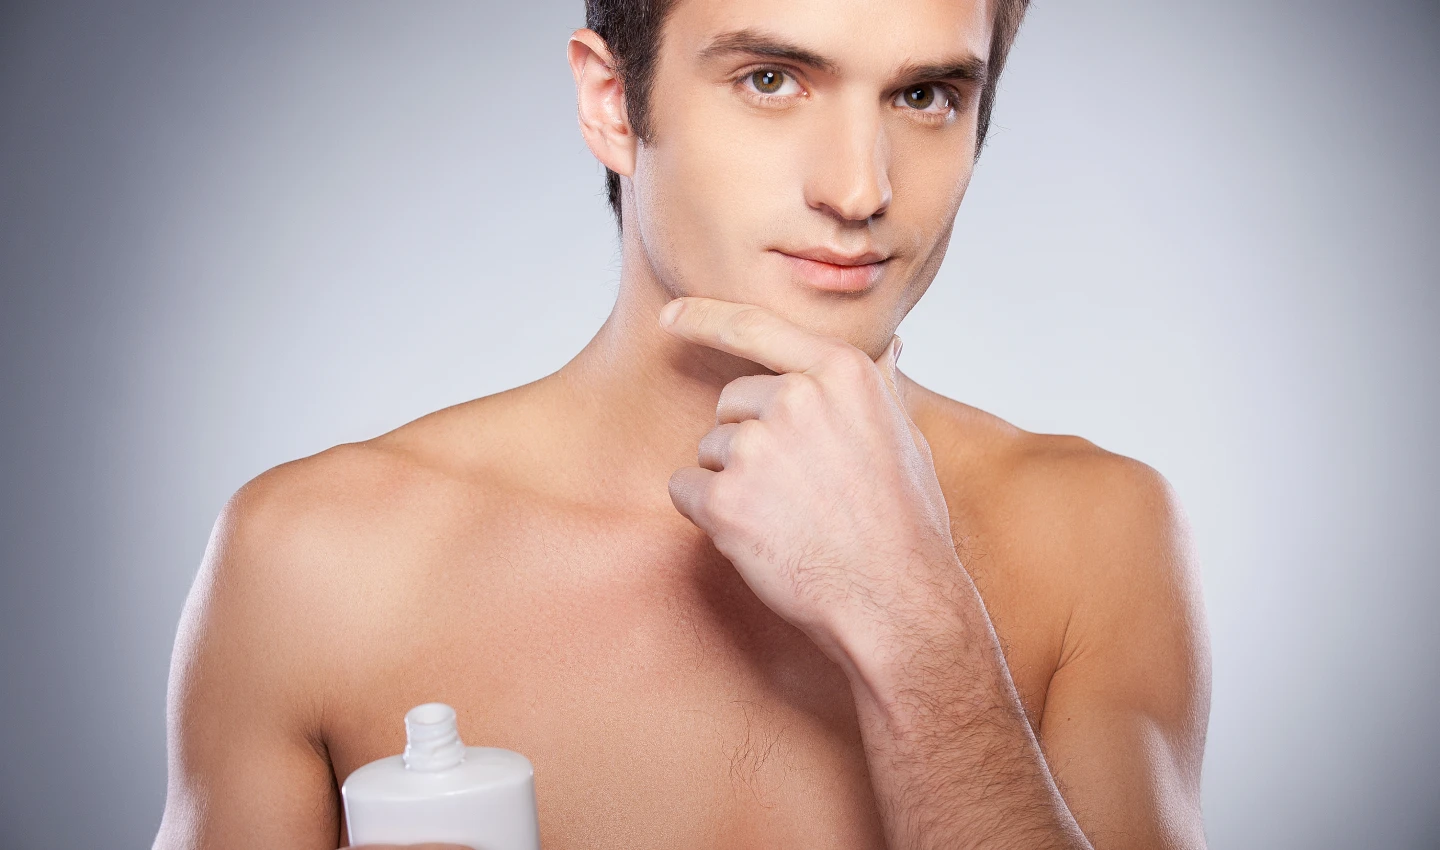 A man applies aftershave balm to his face after shaving to prevent irritation and moisturize his skin.